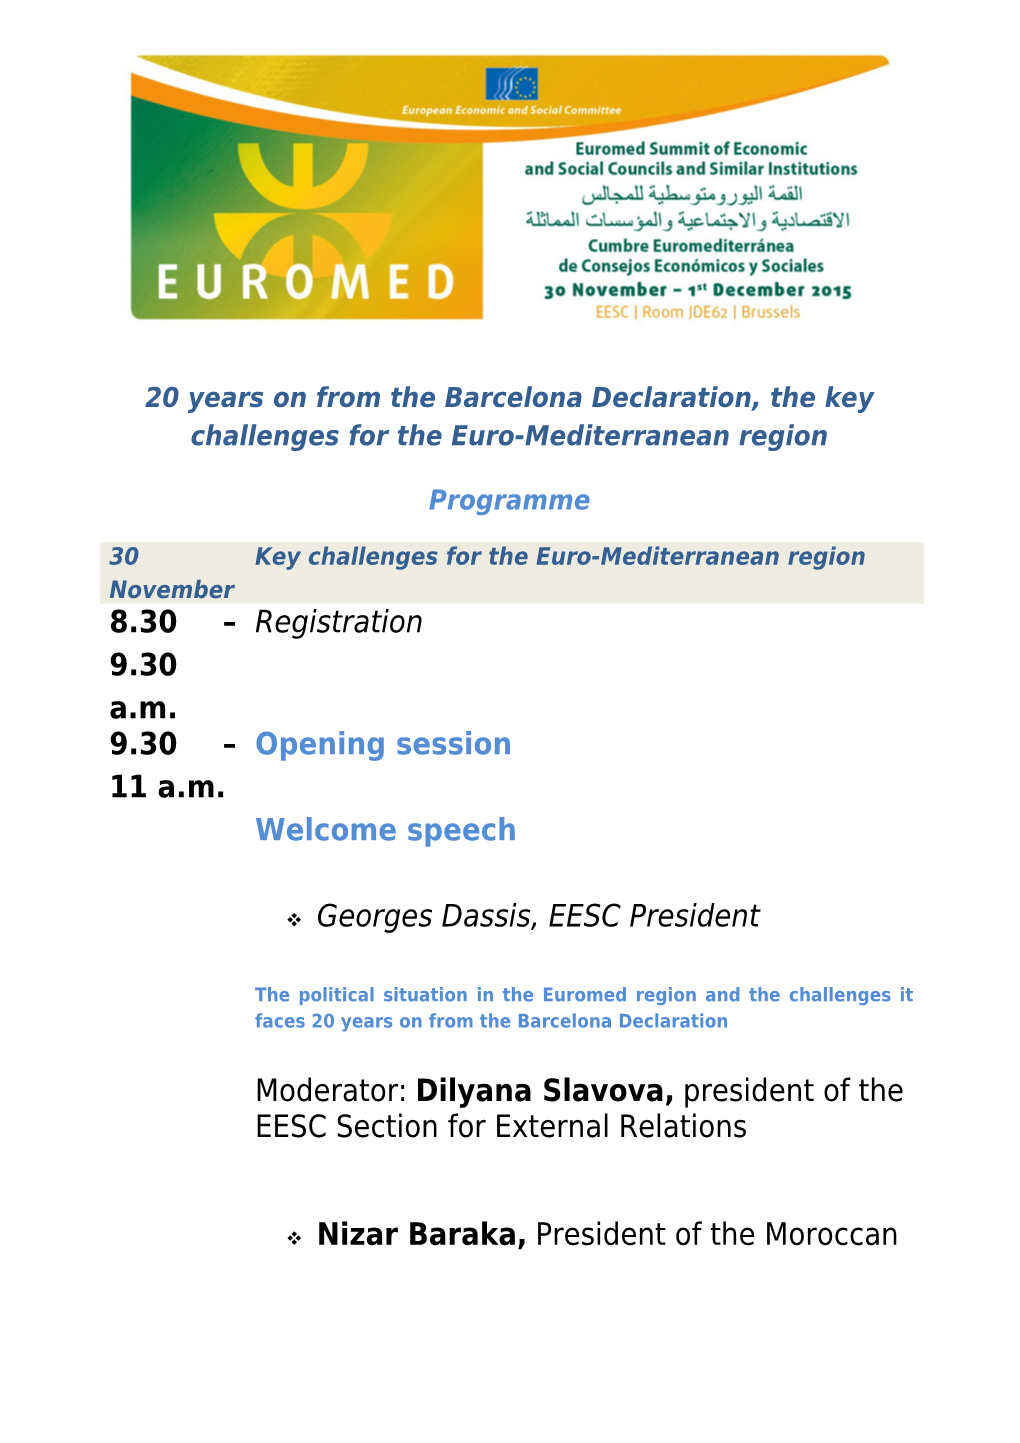 Draft Programme for EUROMED Summit